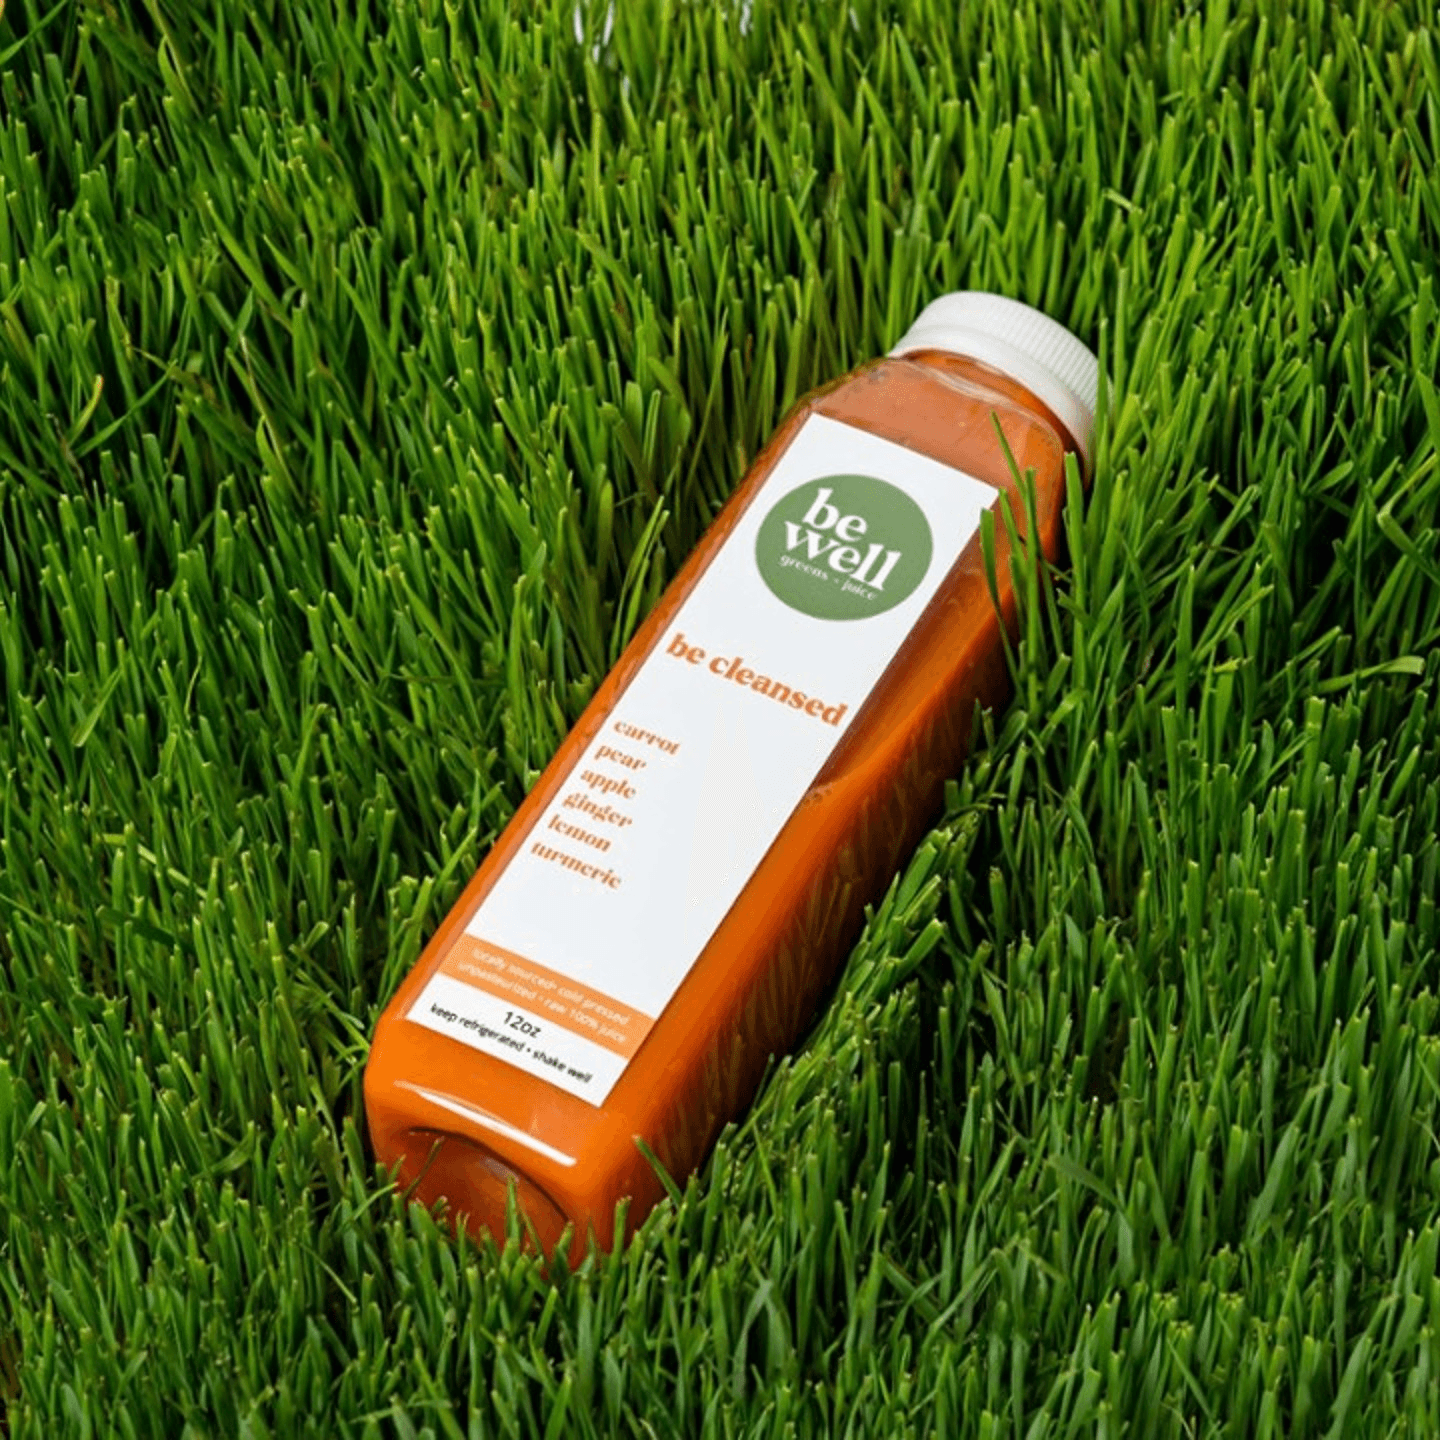 Cold-Pressed Juices for Health